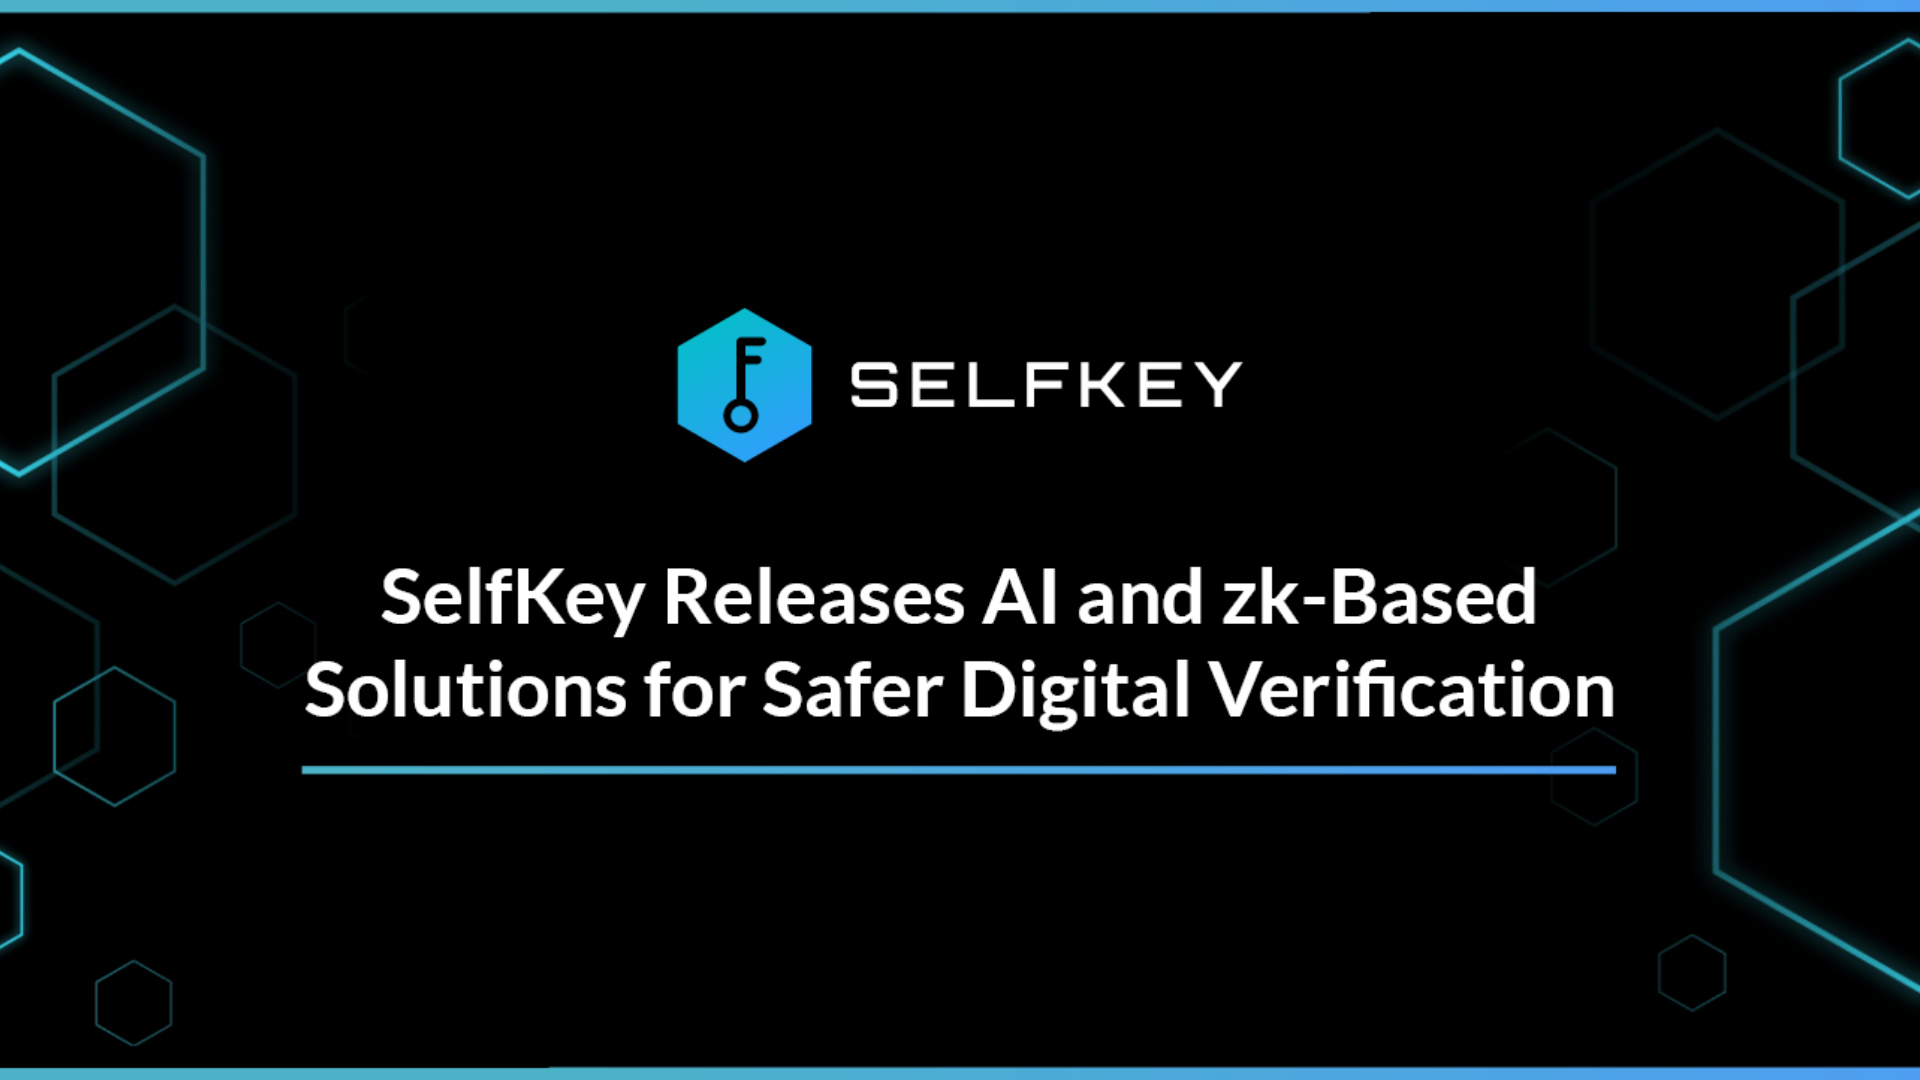 SelfKey to Release AI and Zk-Based Digital Verification Solutions